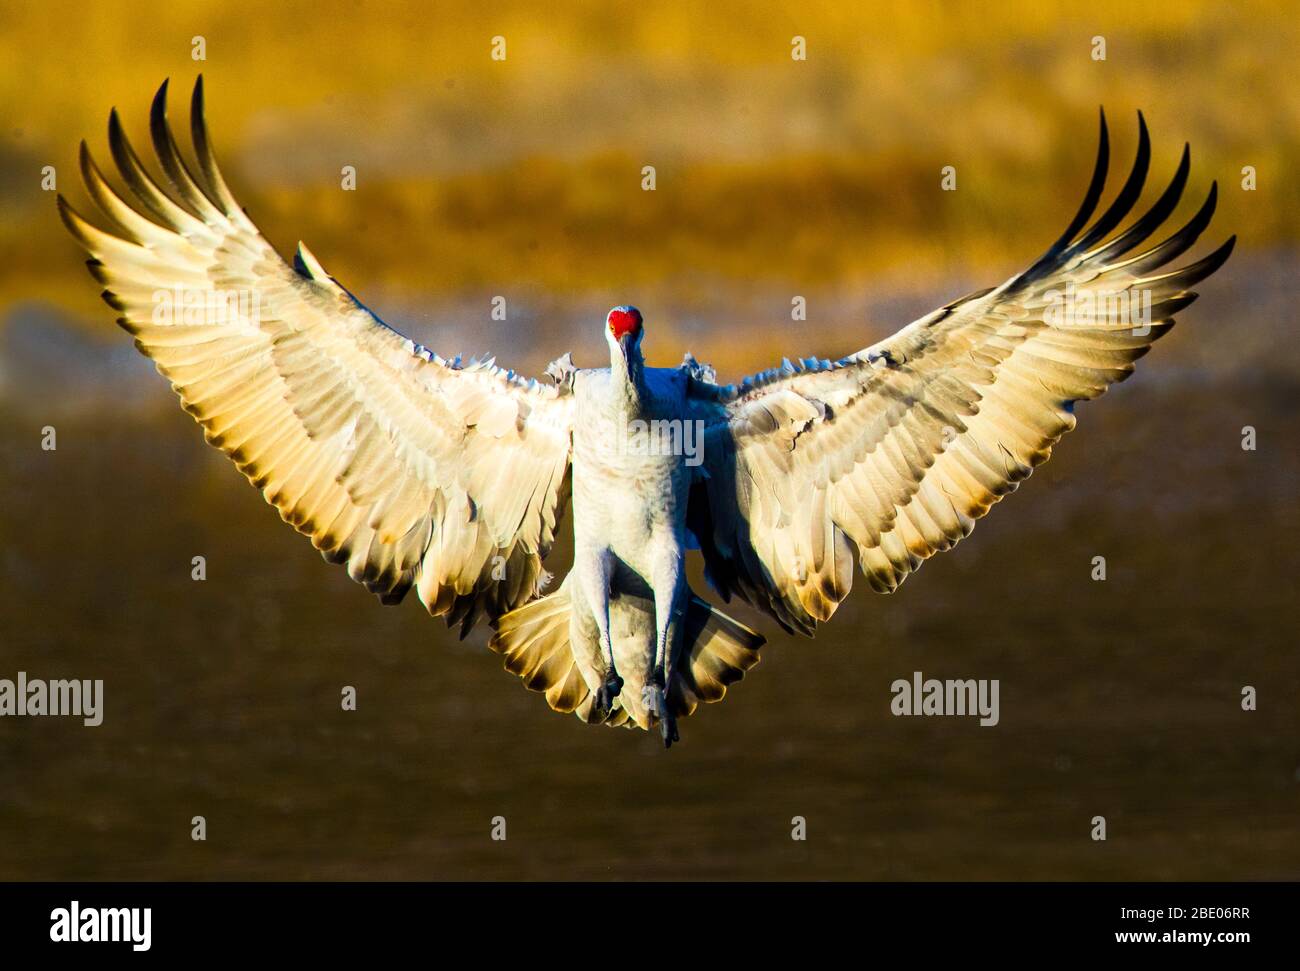 Portrait of Sandhill crane with spread wings, New Mexico, USA Stock Photo